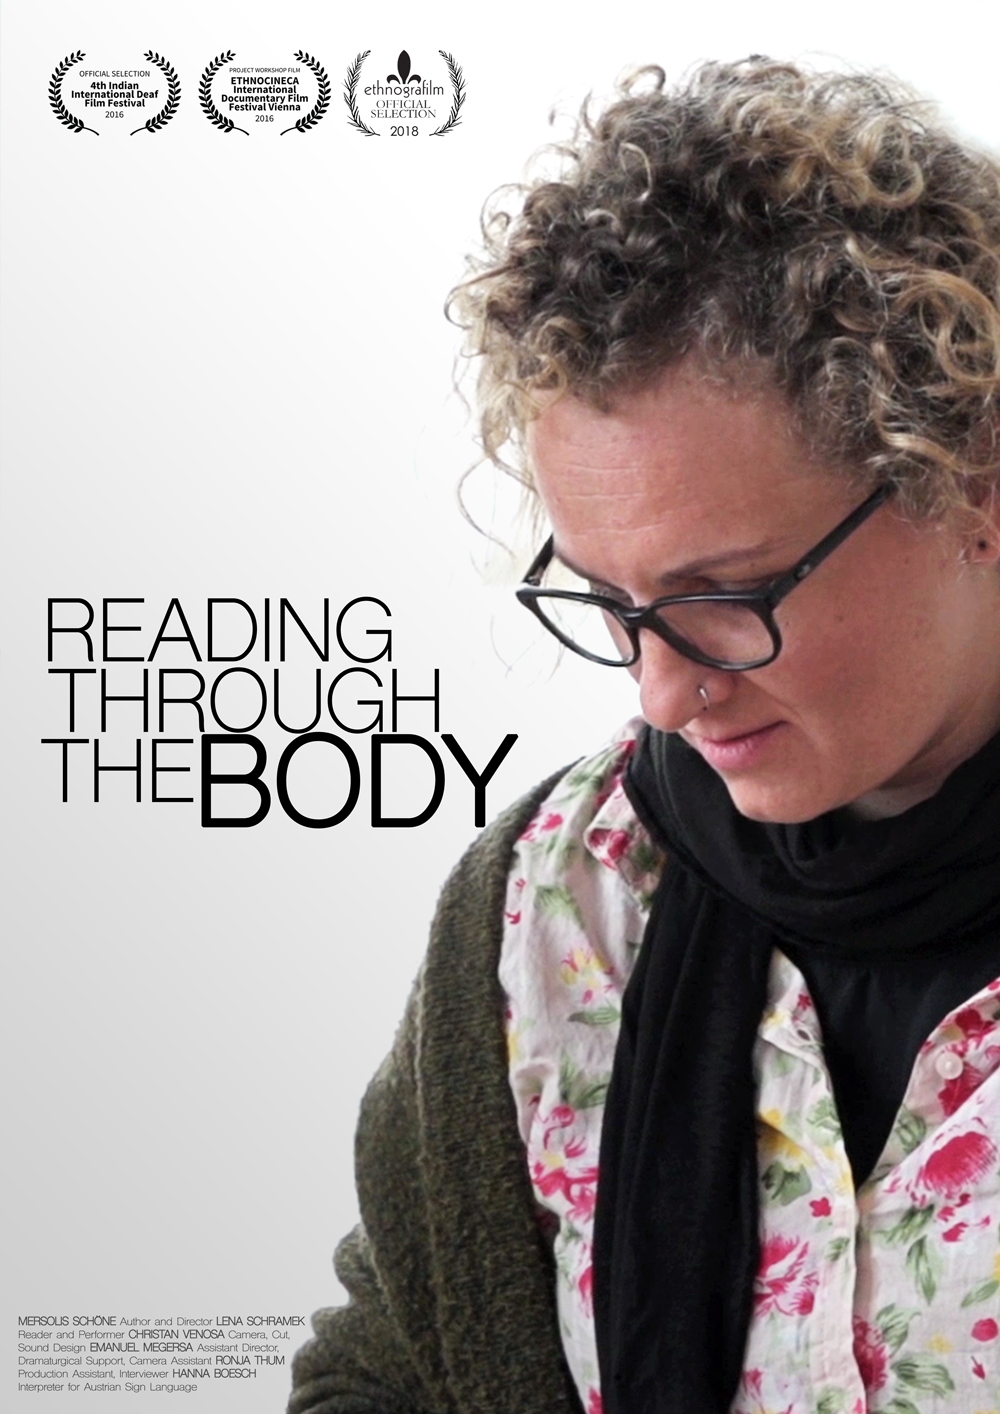 Reading Through the Body (Still) - by Mersolis Schöne with Christan Venosa and Emanuel Megersa